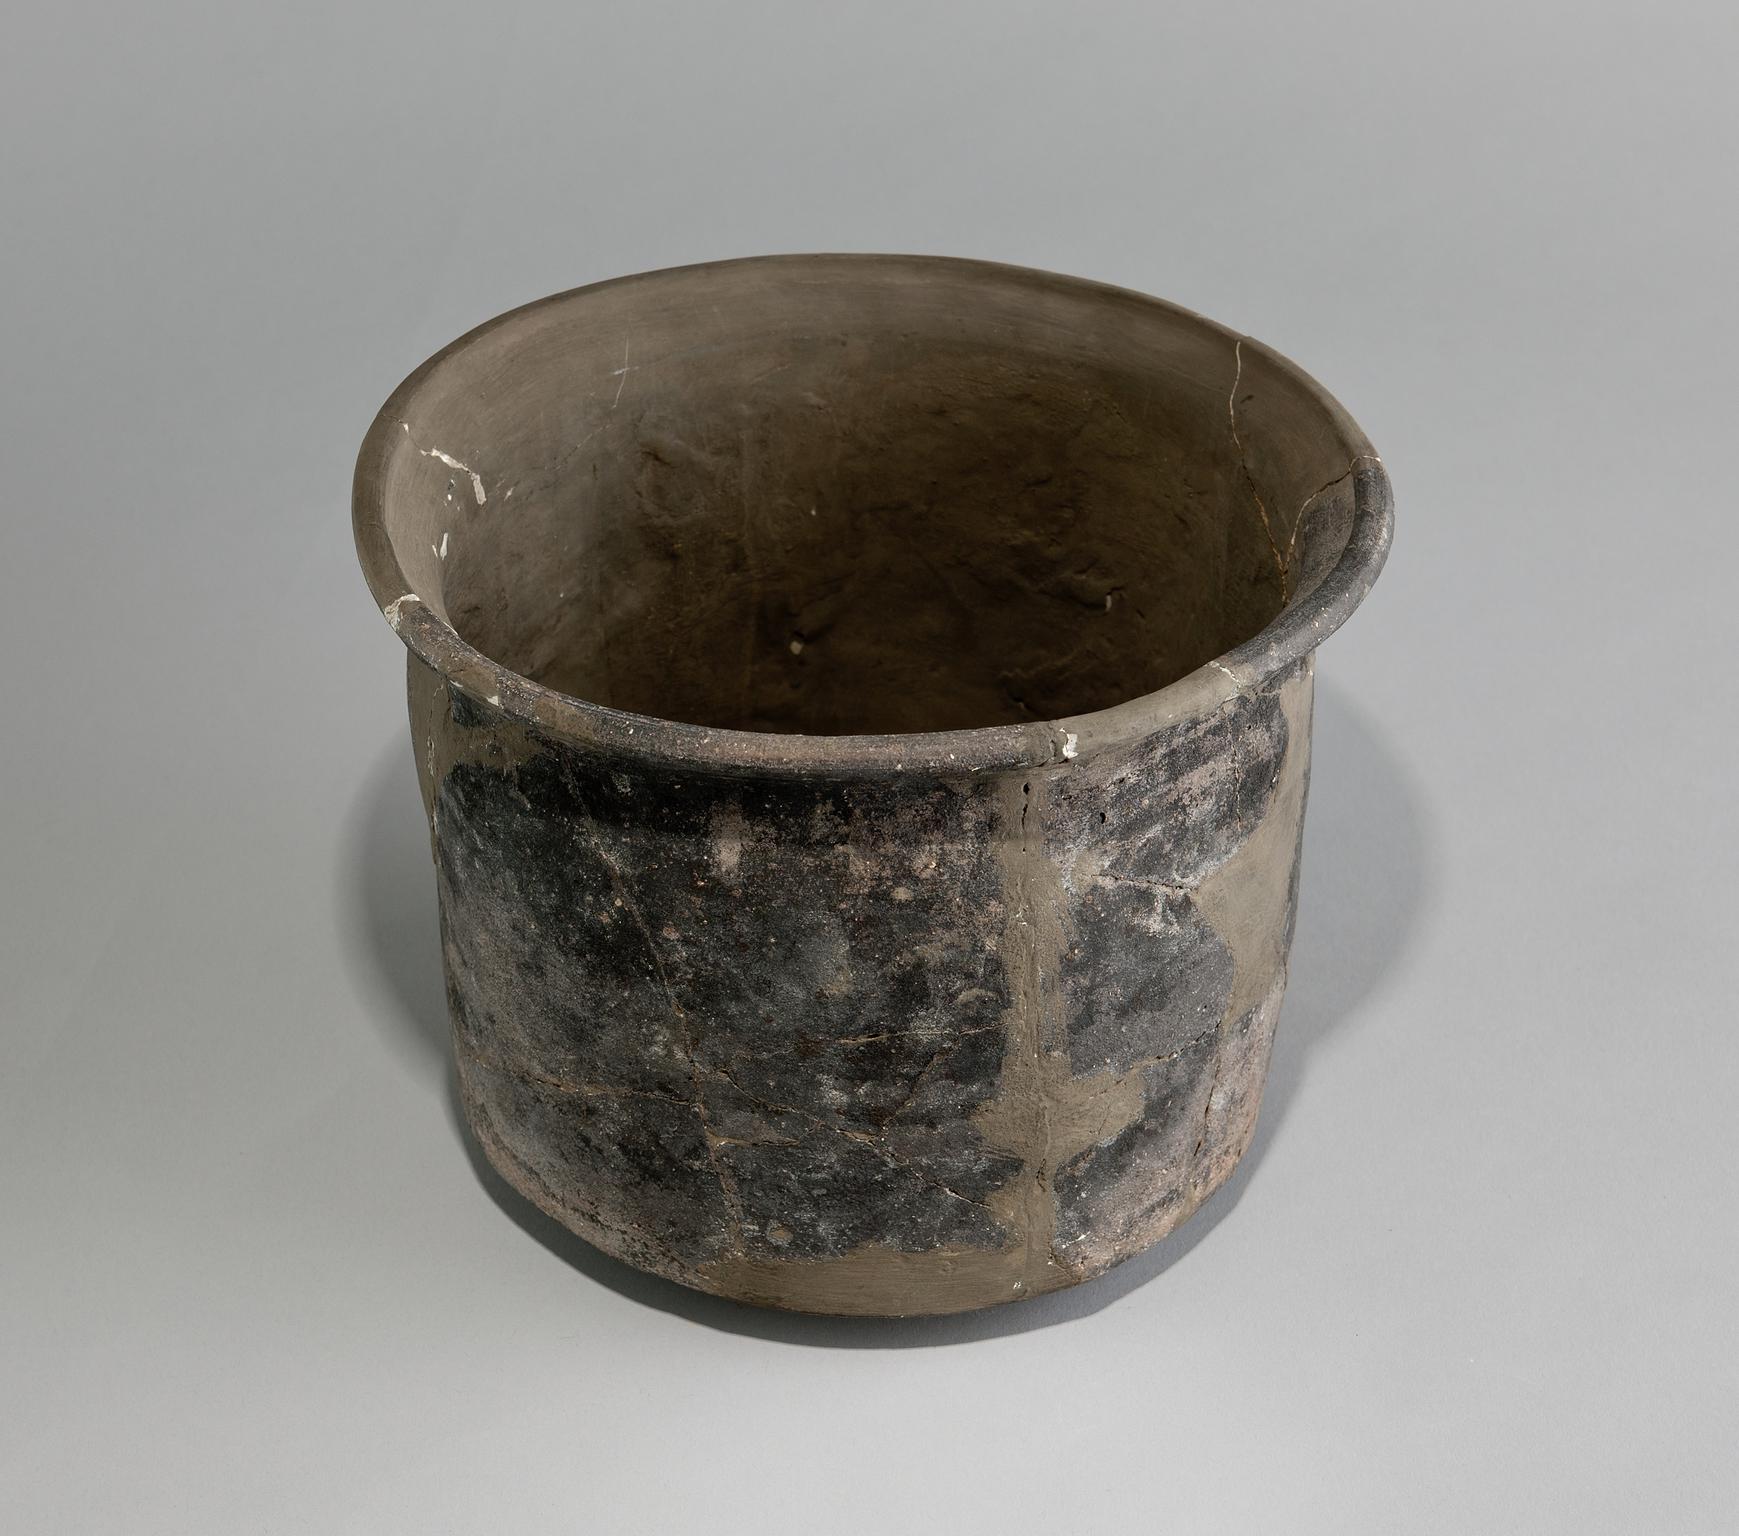 Medieval / Post-Medieval pottery cooking pot